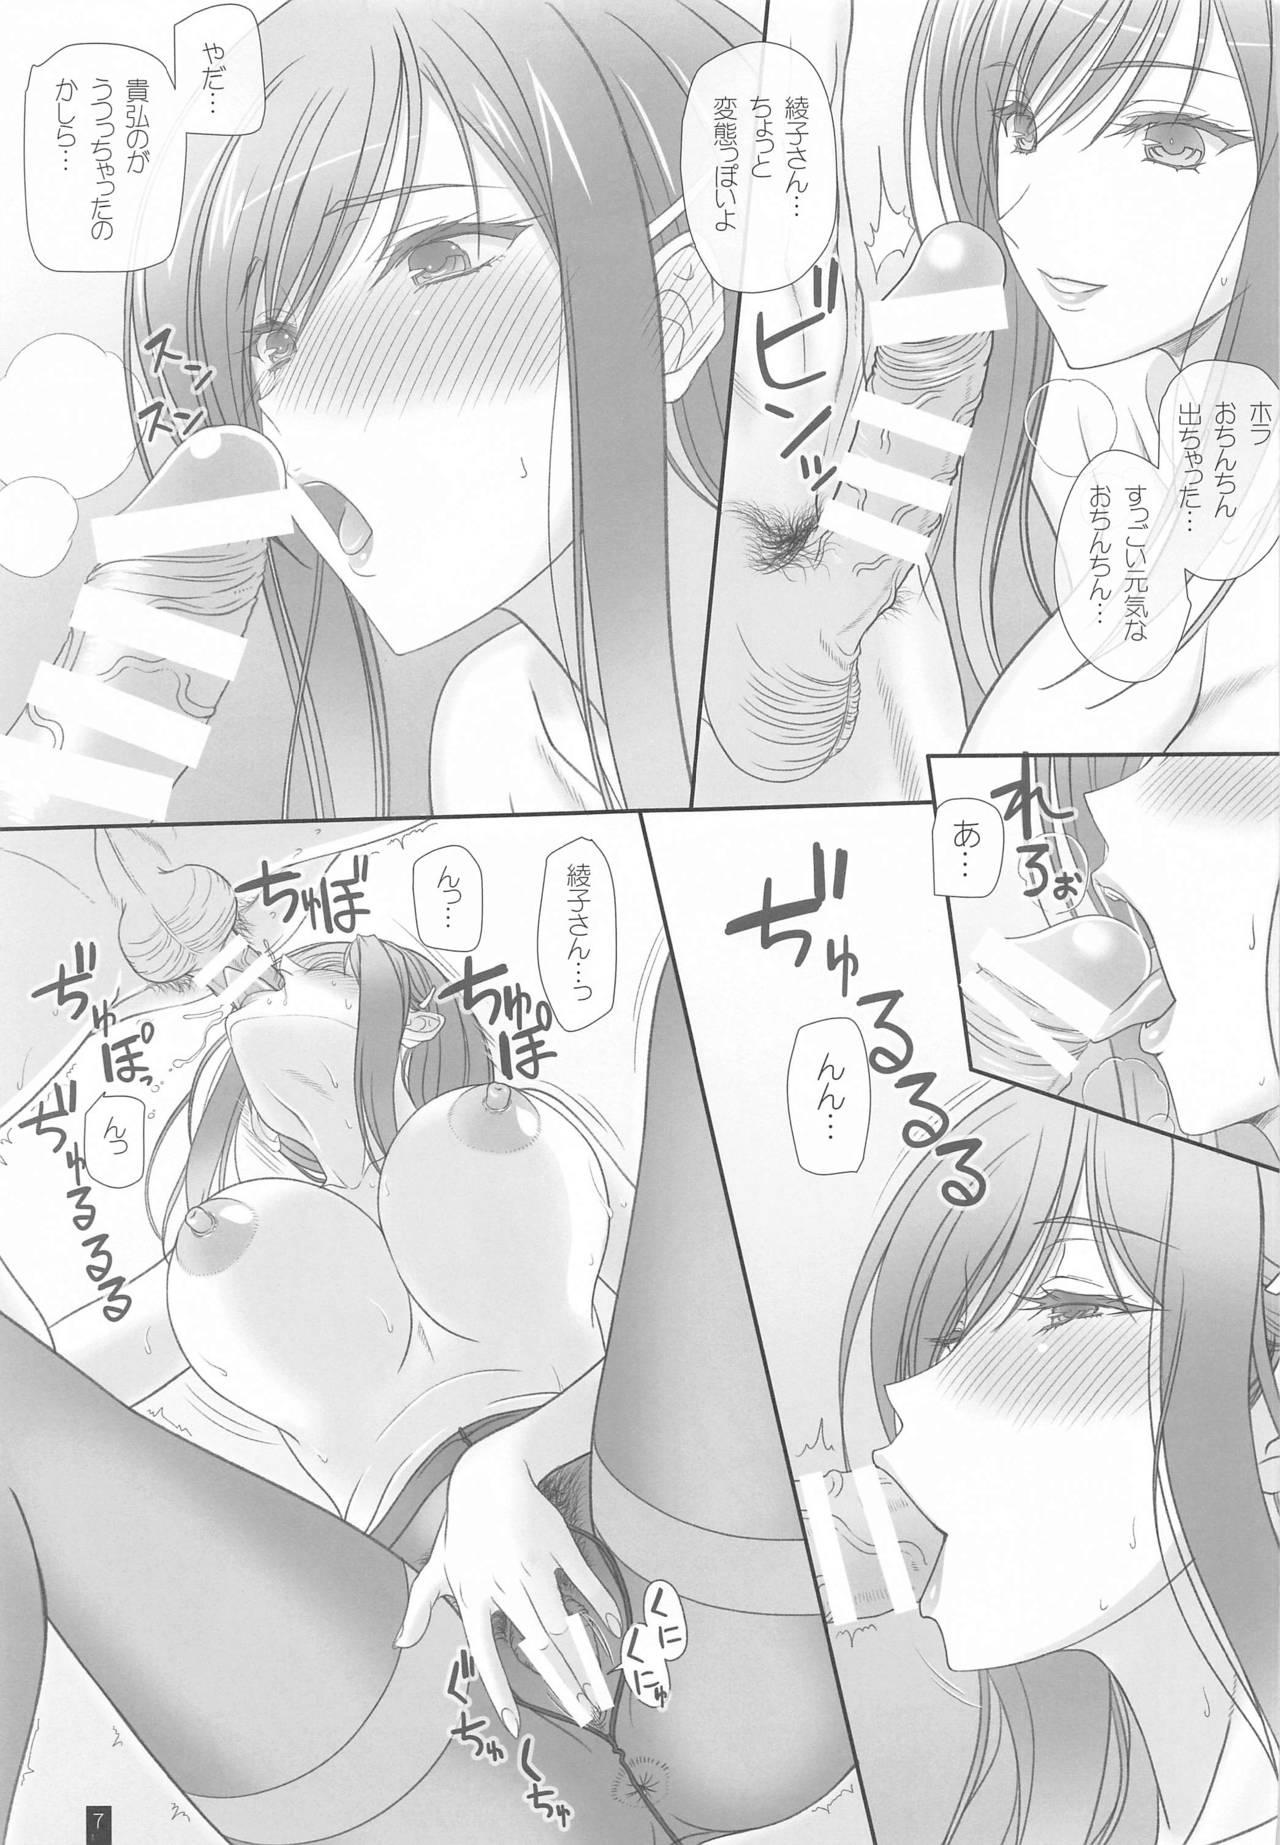 Pussy Eating Oh,Ayako!More!&More!! - Walkure romanze Scene - Page 6